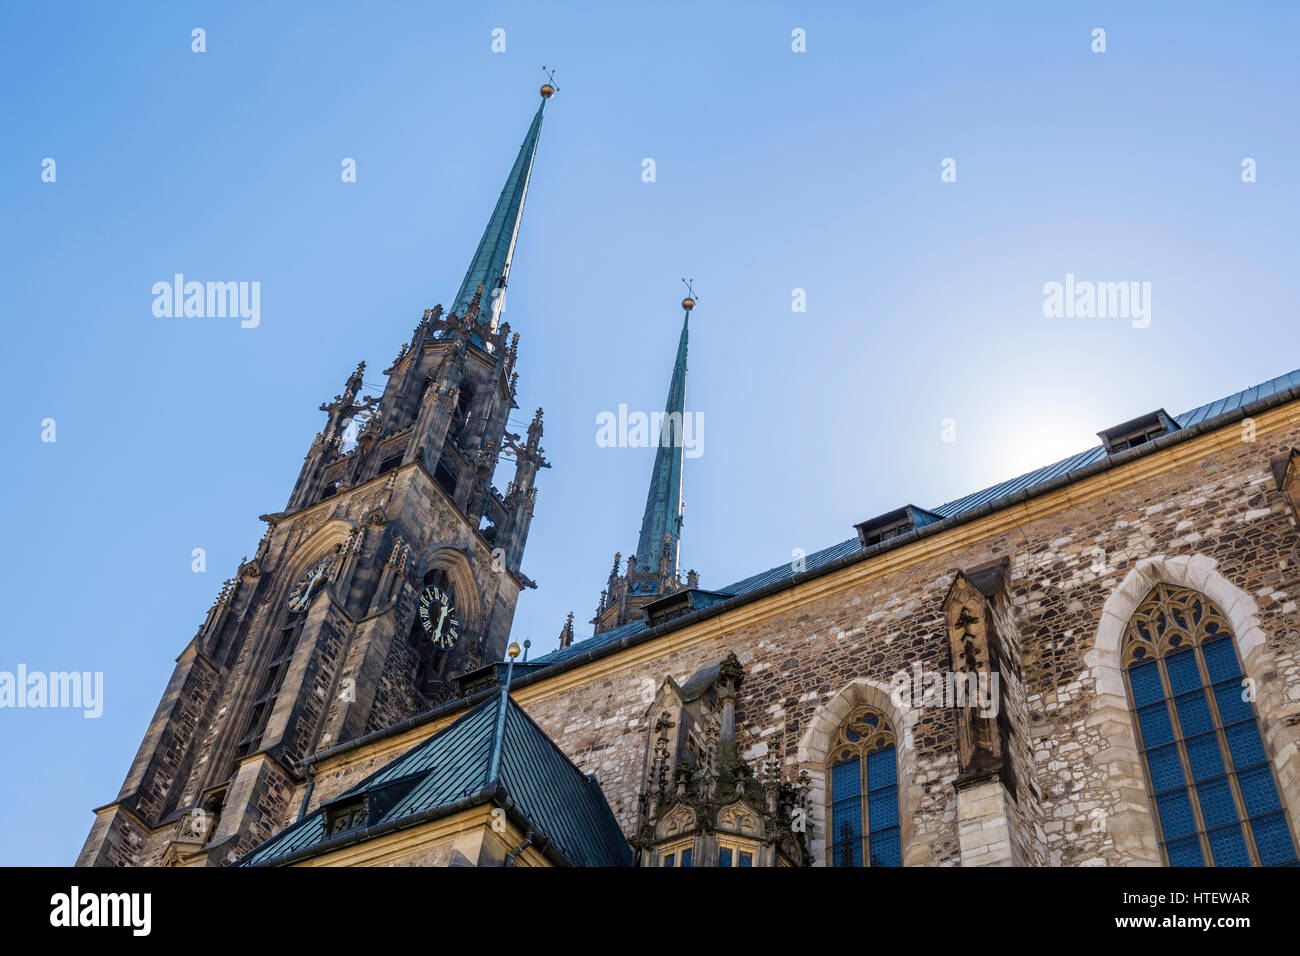 Brno Cathedral. Cathedral of Saints Peter and Paul, Petrov hill, Brno, Moravia, Czech Republic Stock Photo